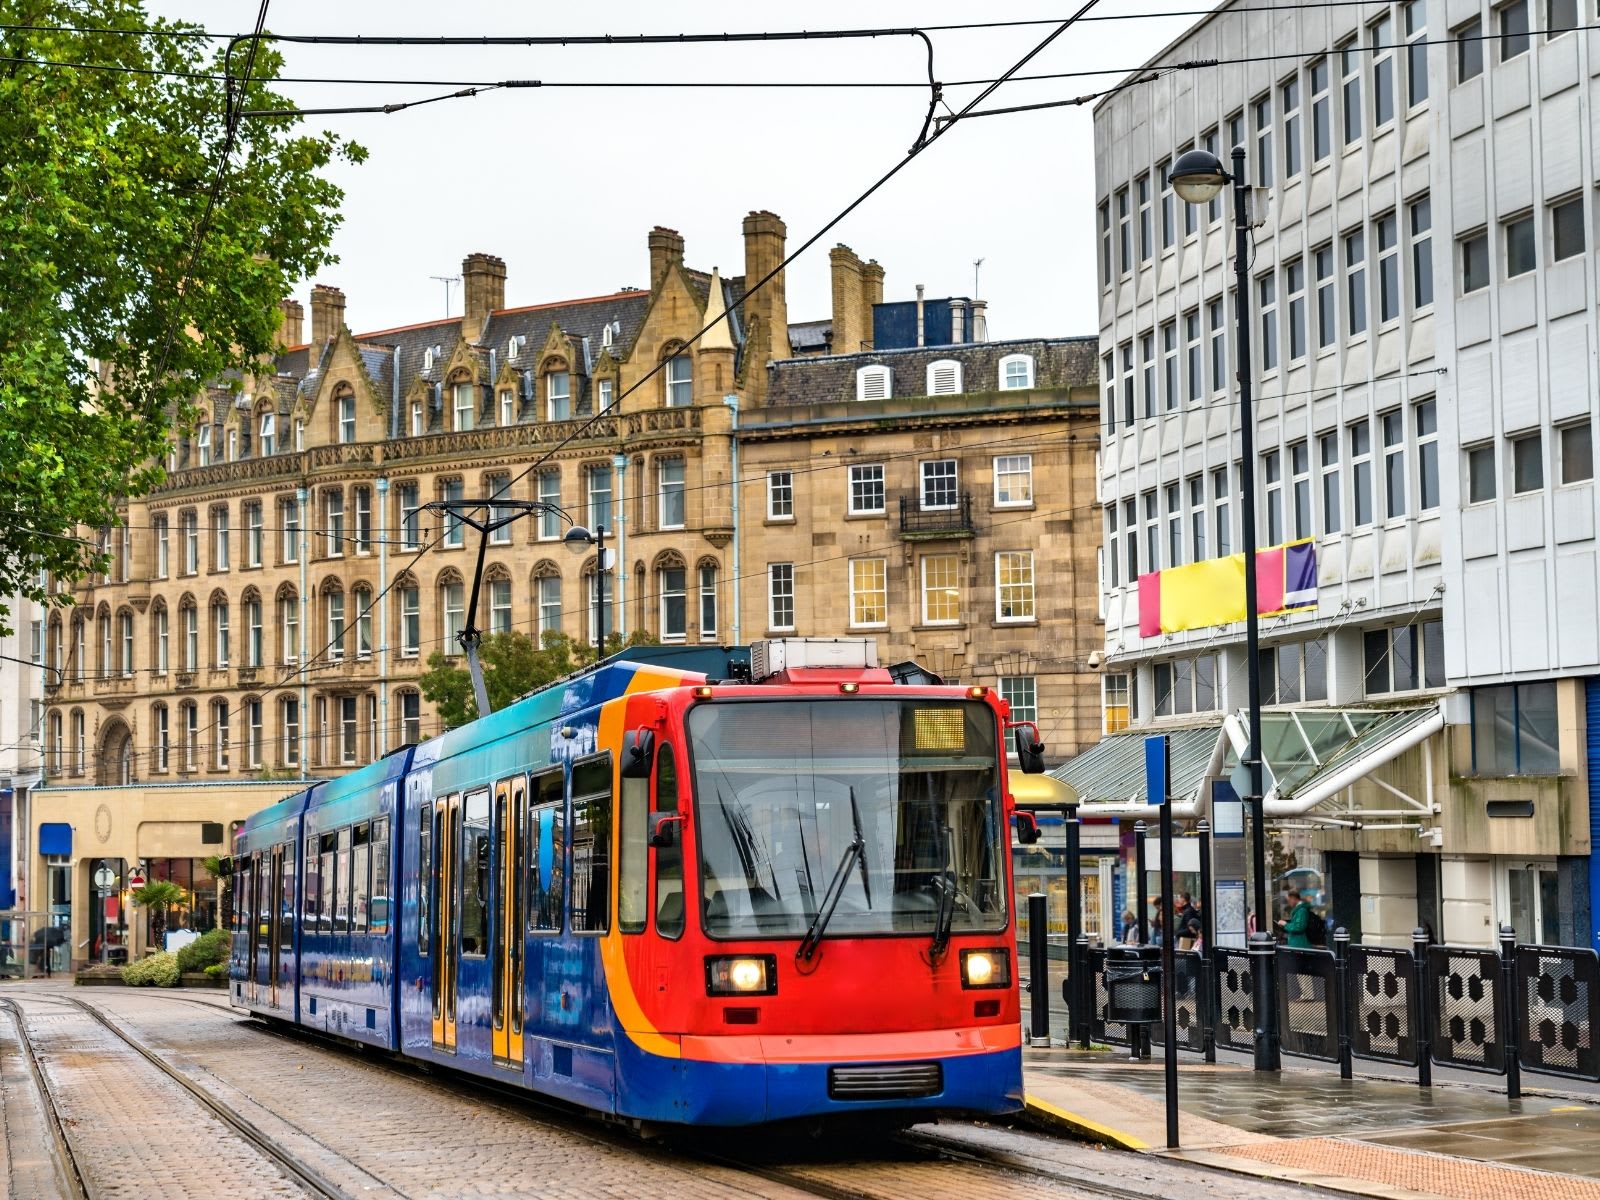 City tram at Cathedral station in Sheffield